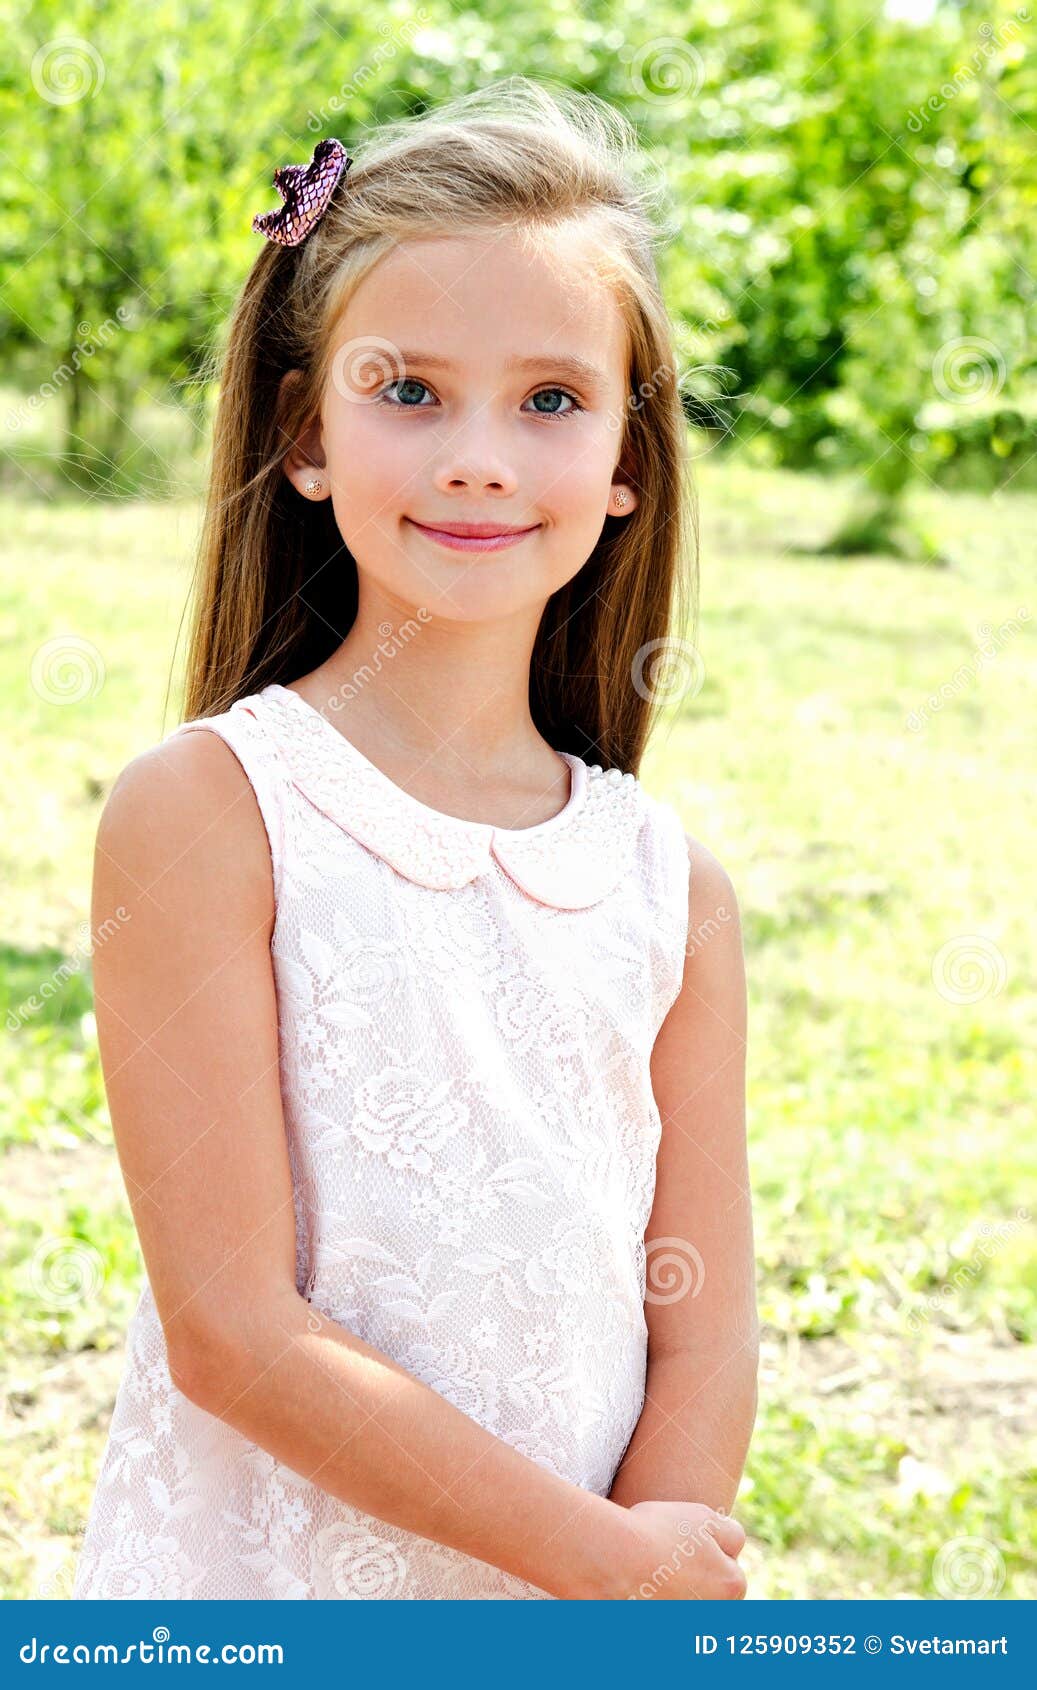 Portrait of Adorable Smiling Little Girl Child Outdoors Stock Photo ...